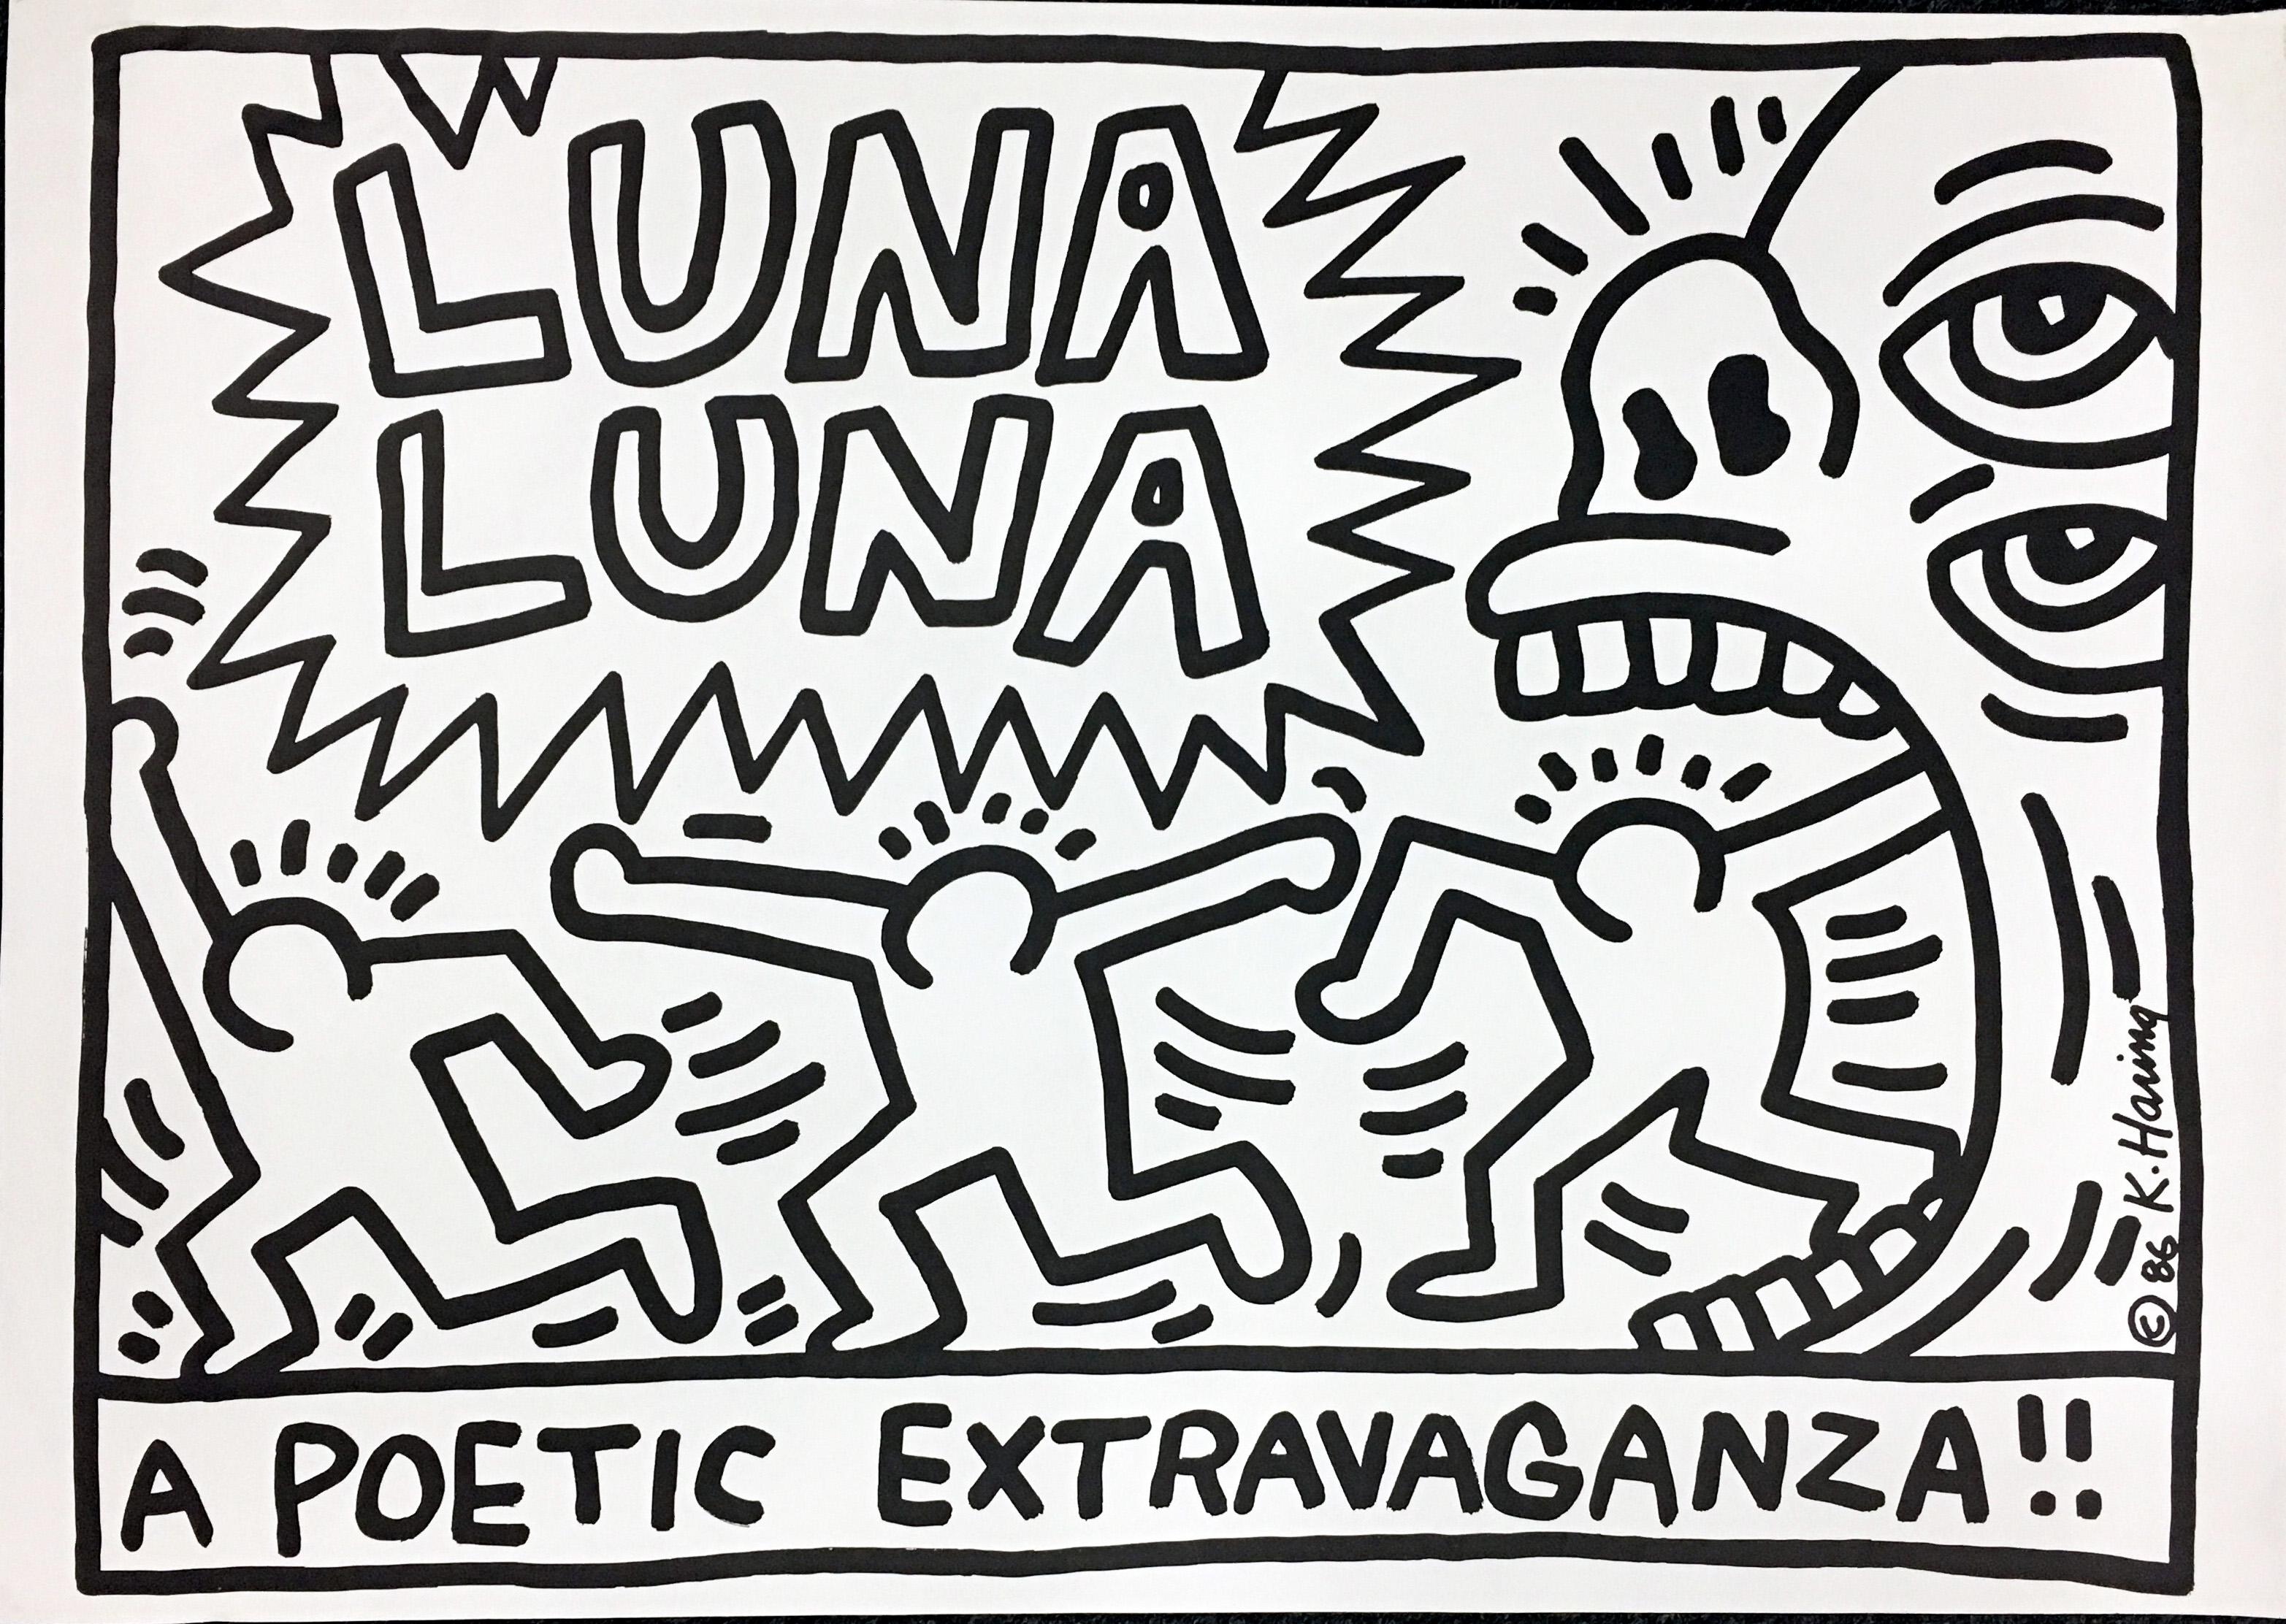 Keith Haring 'Luna Luna. A Poetic Extravaganza!!' Poster 1986:
Keith Haring created three poster designs for the poetic spectacle Luna Luna, 'A Fair with Modern Art', presented by the Viennese impresario Andre Heller. The show opened on June 3rd